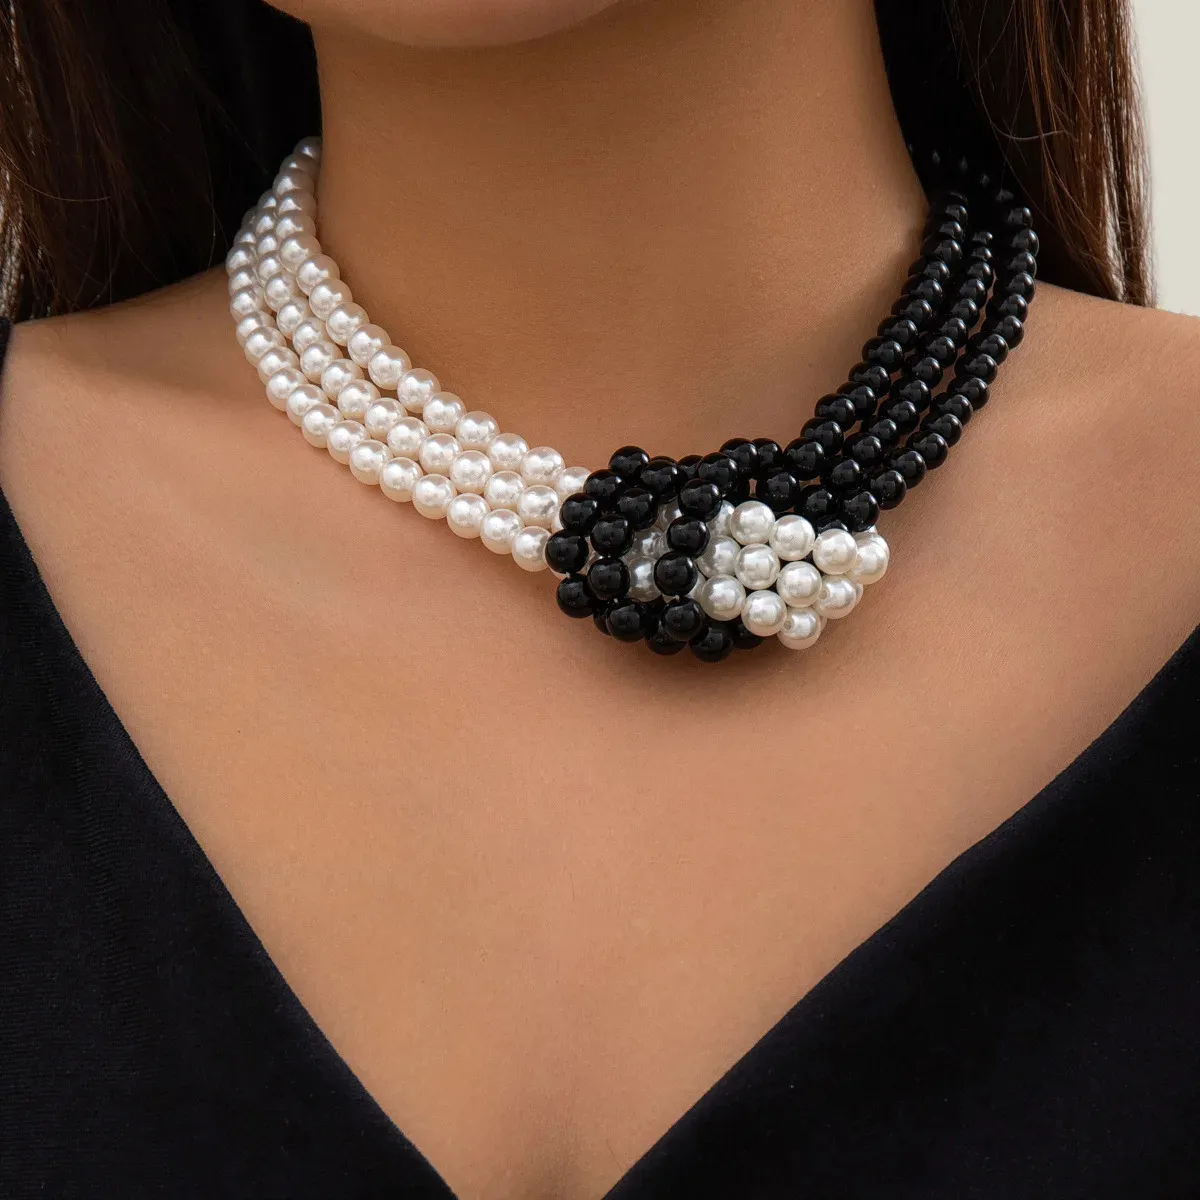 LUOXIN Fashion Girls Choker Statement Necklace White Black Pearl Beads Knot Necklace